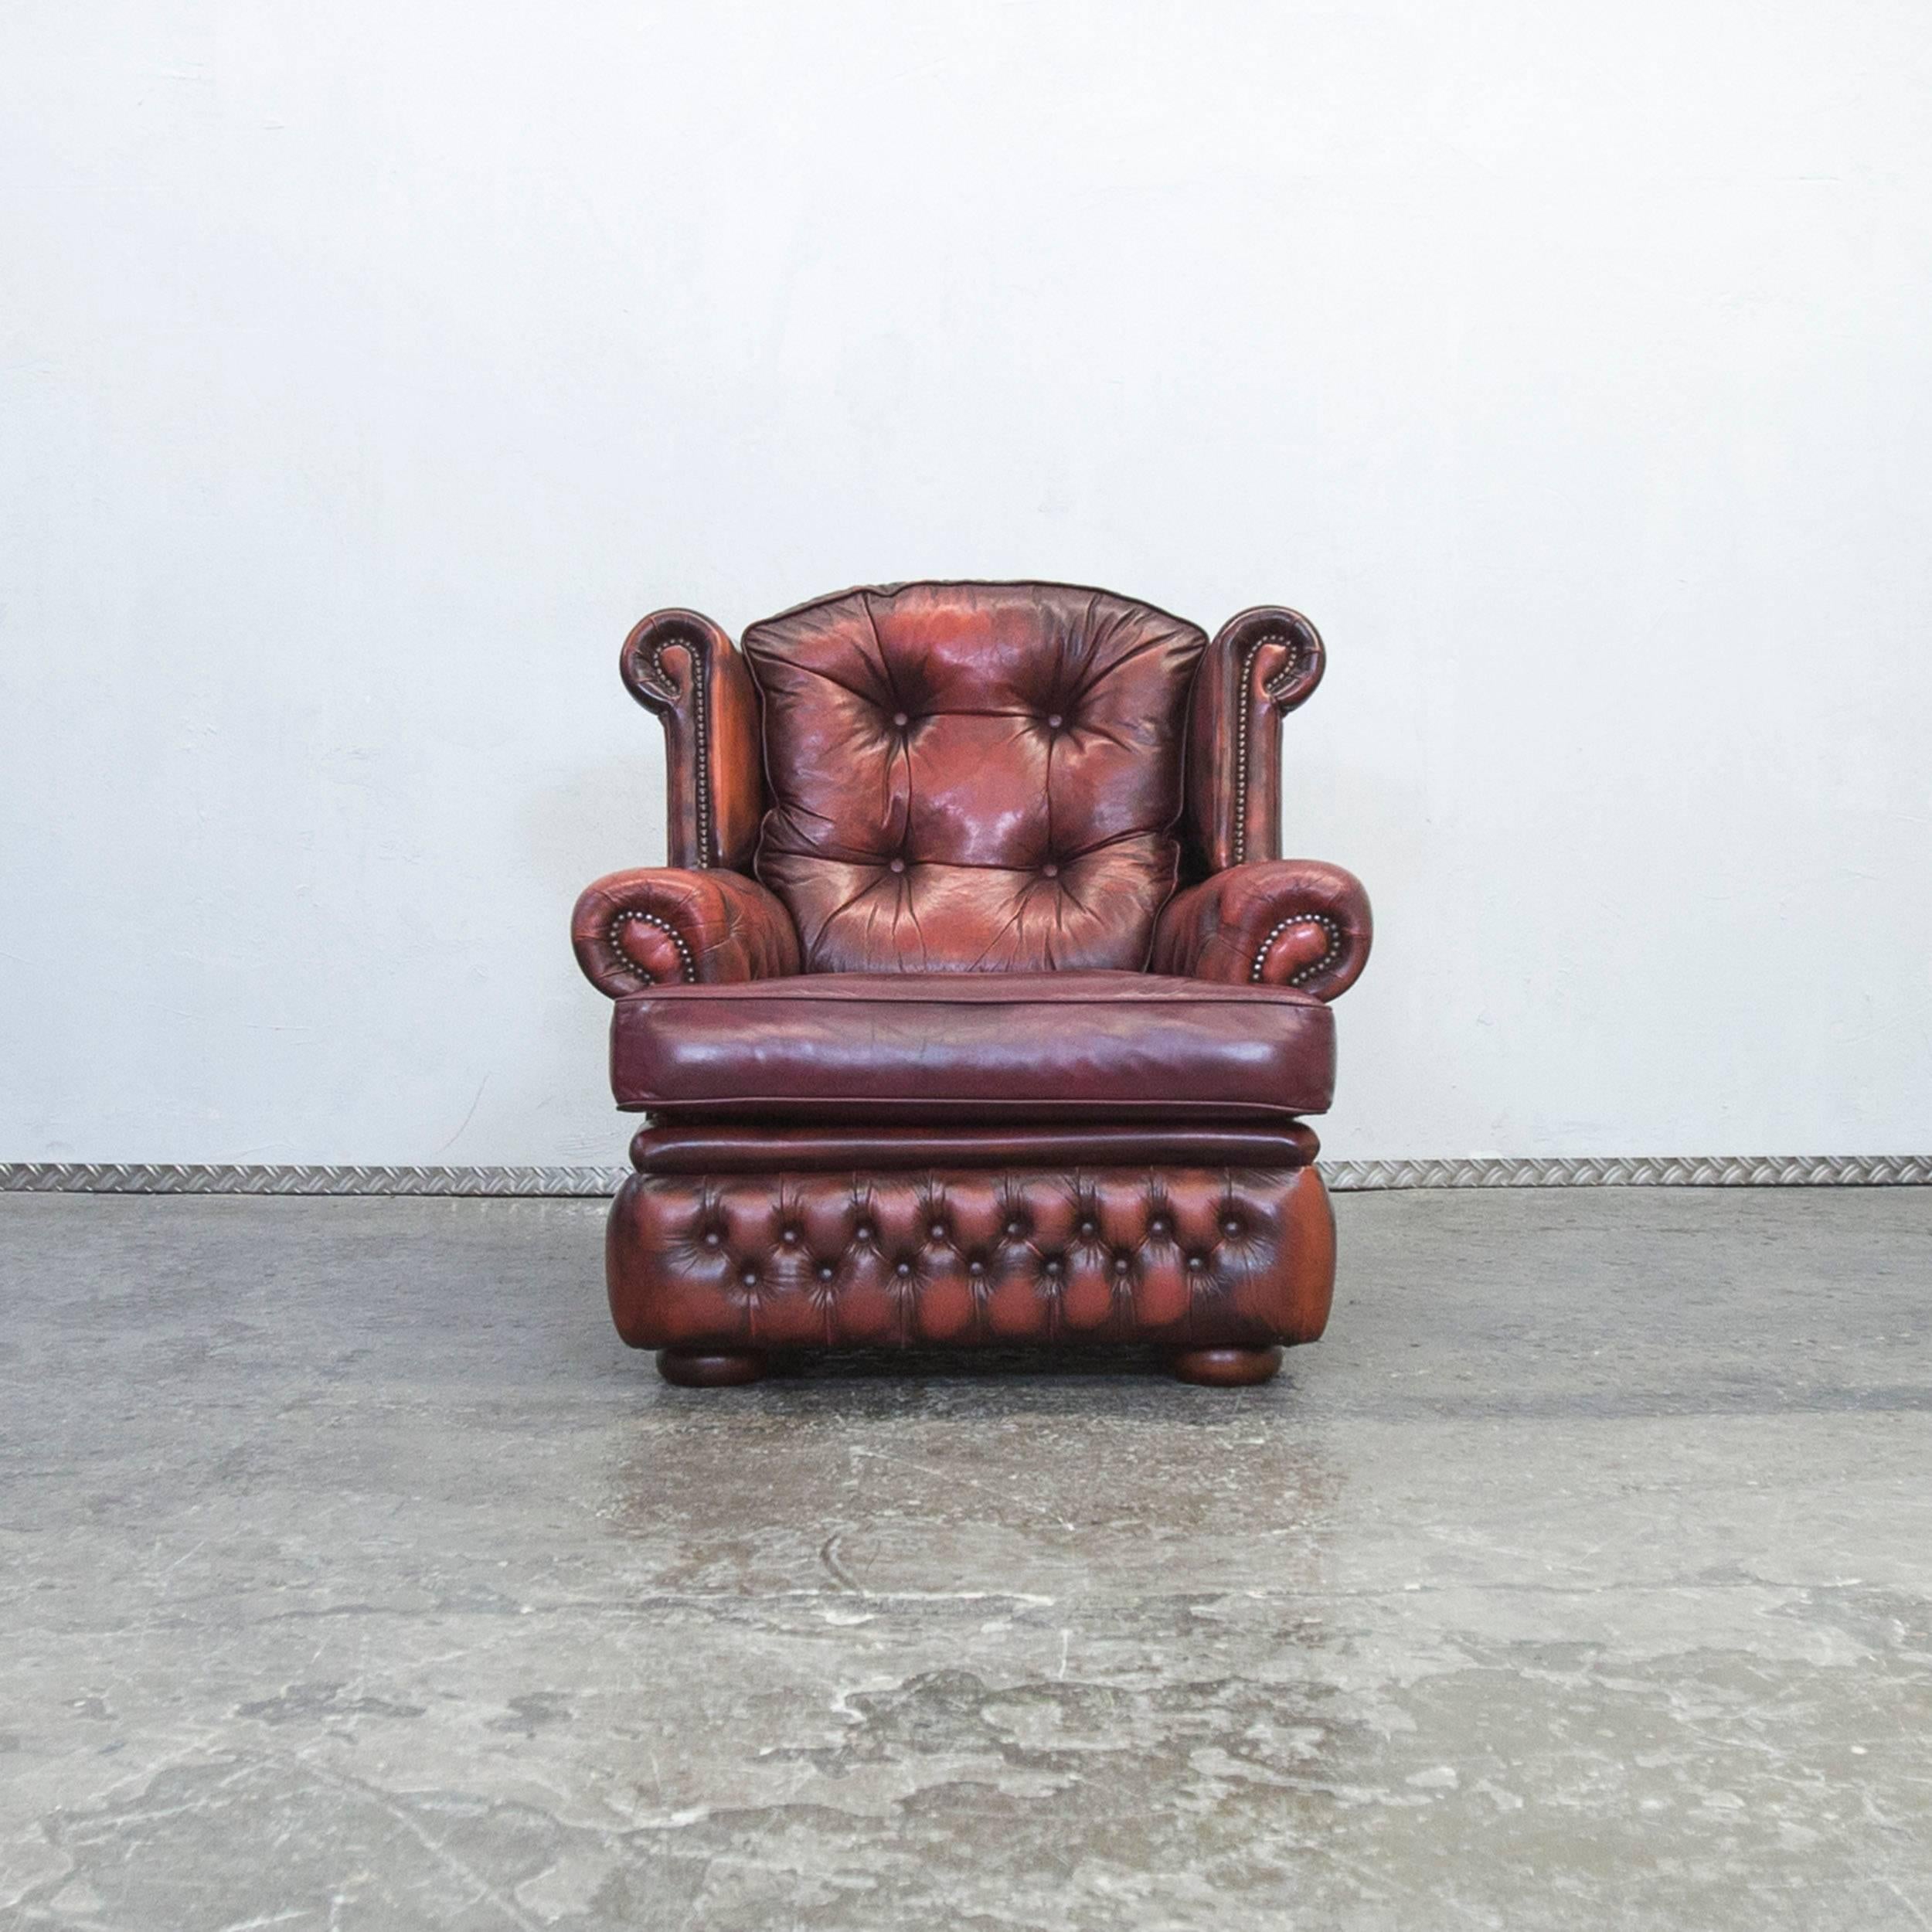 Red and brown colored Chesterfield leather armchair in a vintage style, designed for pure elegance and comfort.